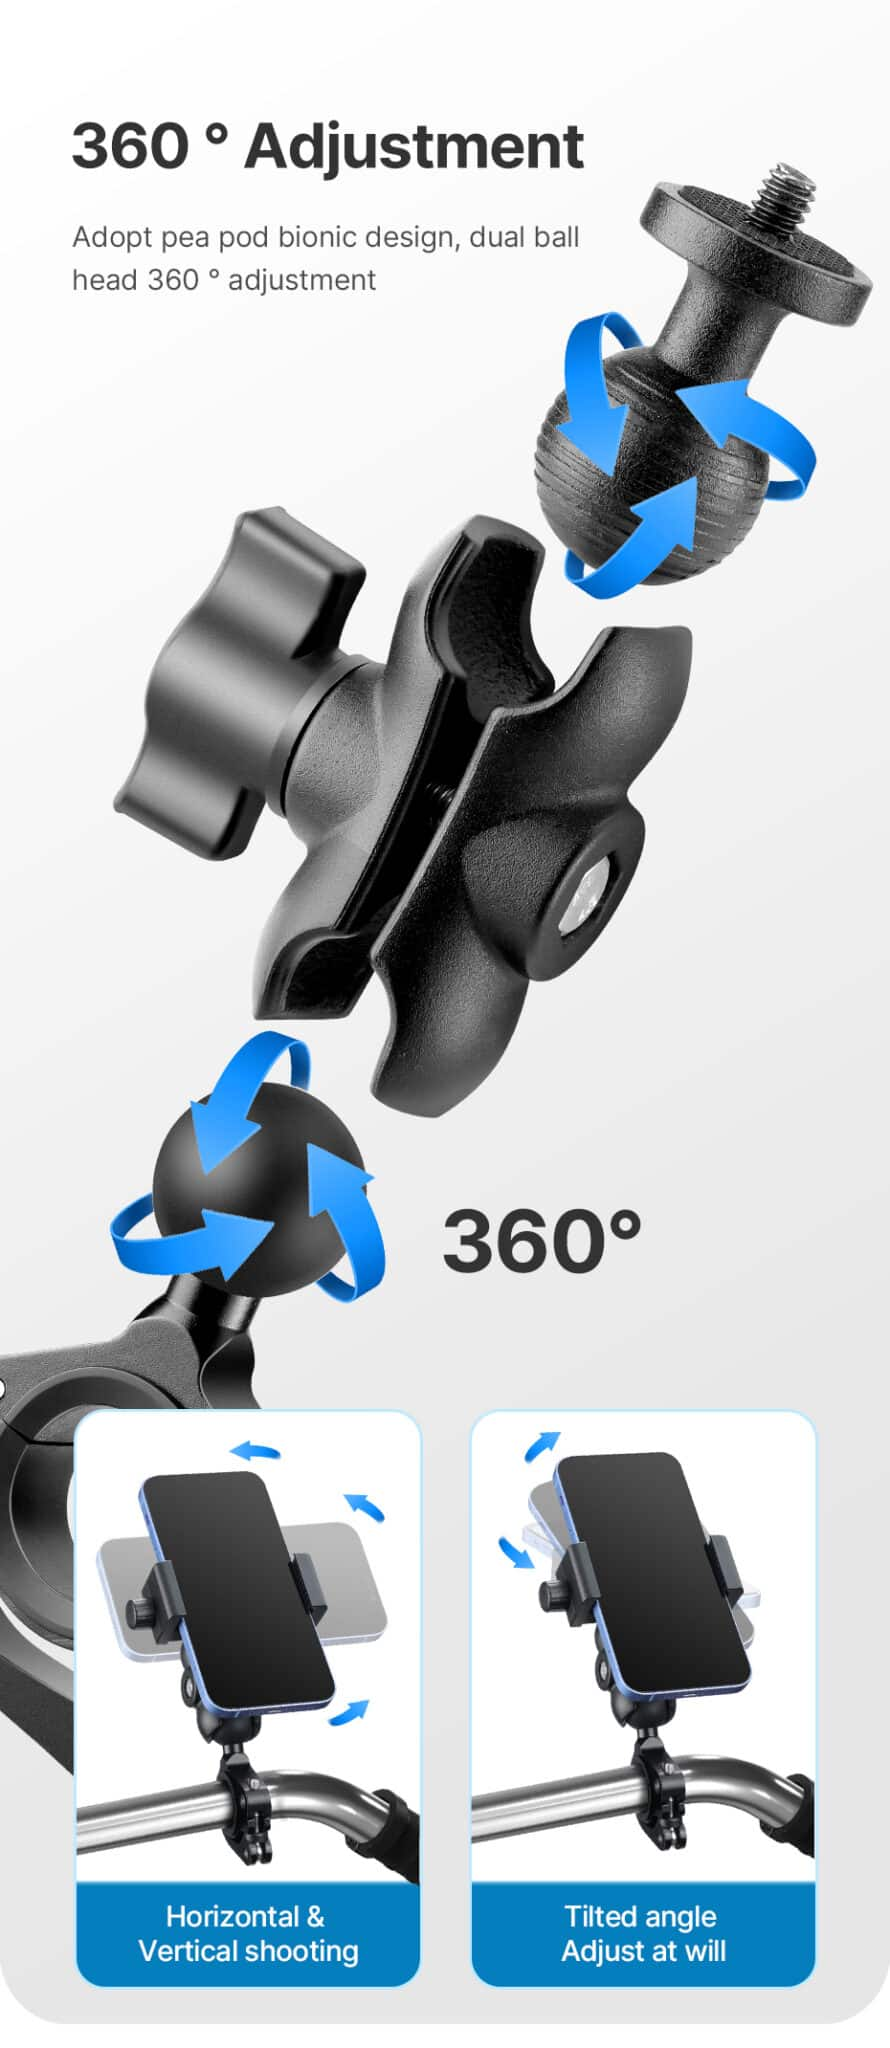 Ulanzi MP-5 Bicycle Mount for smartphone and GoPro